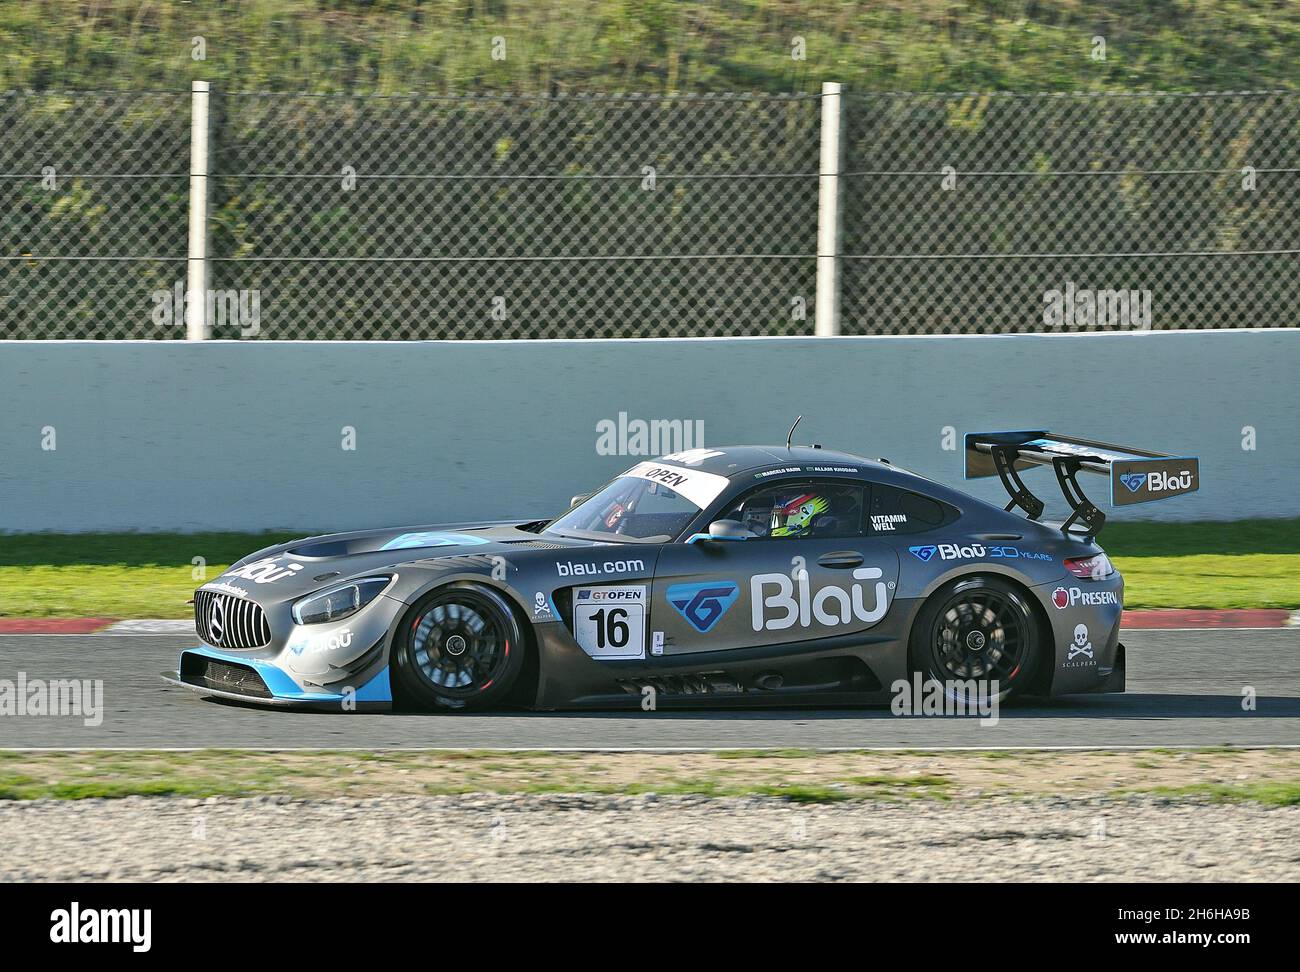 Mercedes AMG GT3-Team Driver School at the international motorsport GT3 championship of the Circuit de Barcelona Catalunya, Montmelo, Catalonia, Spain Stock Photo